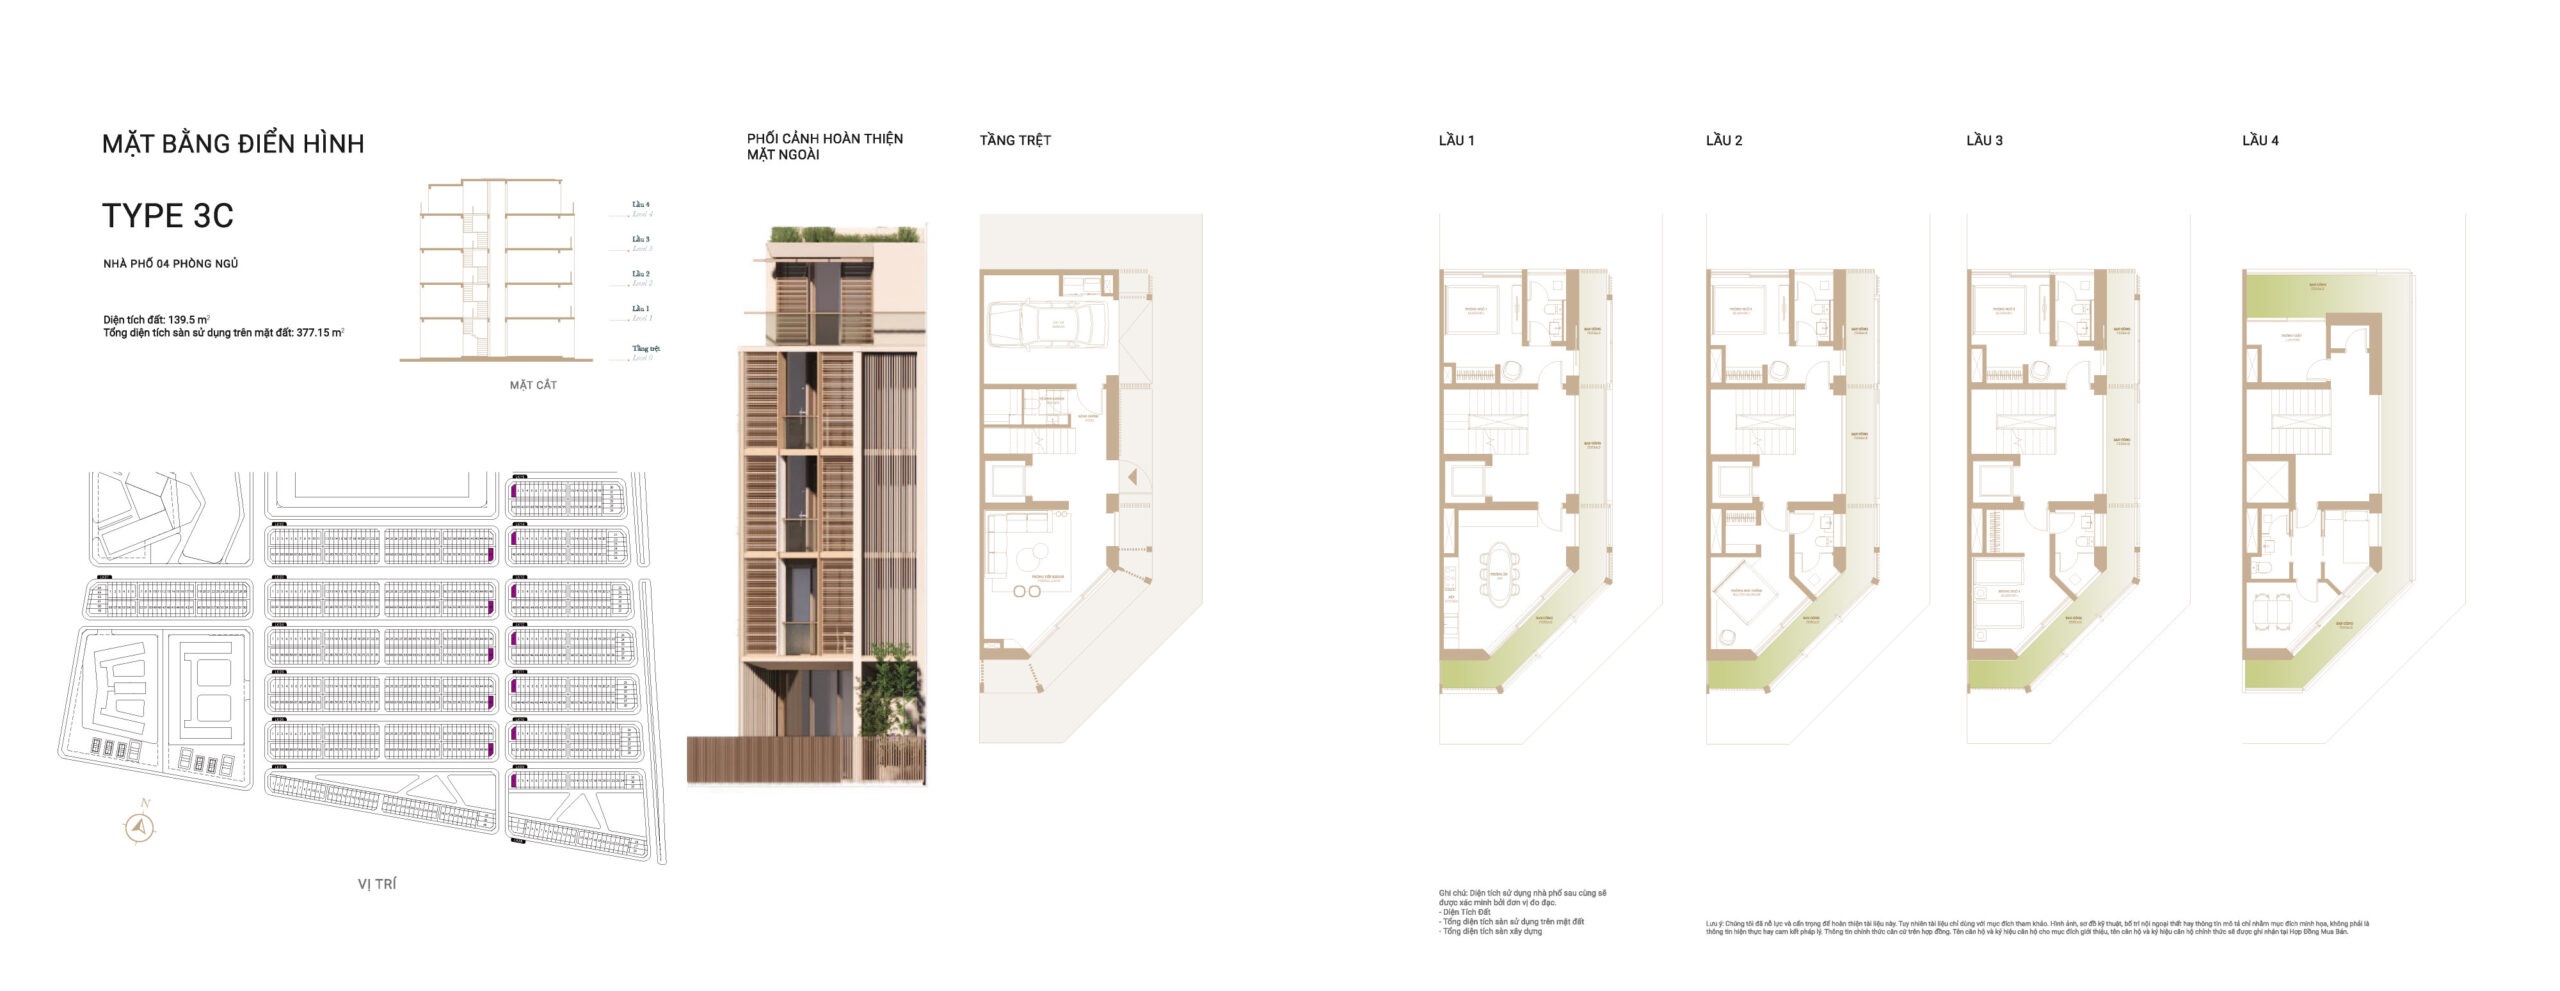 layout-mb-shophouse-3c-the-global-city